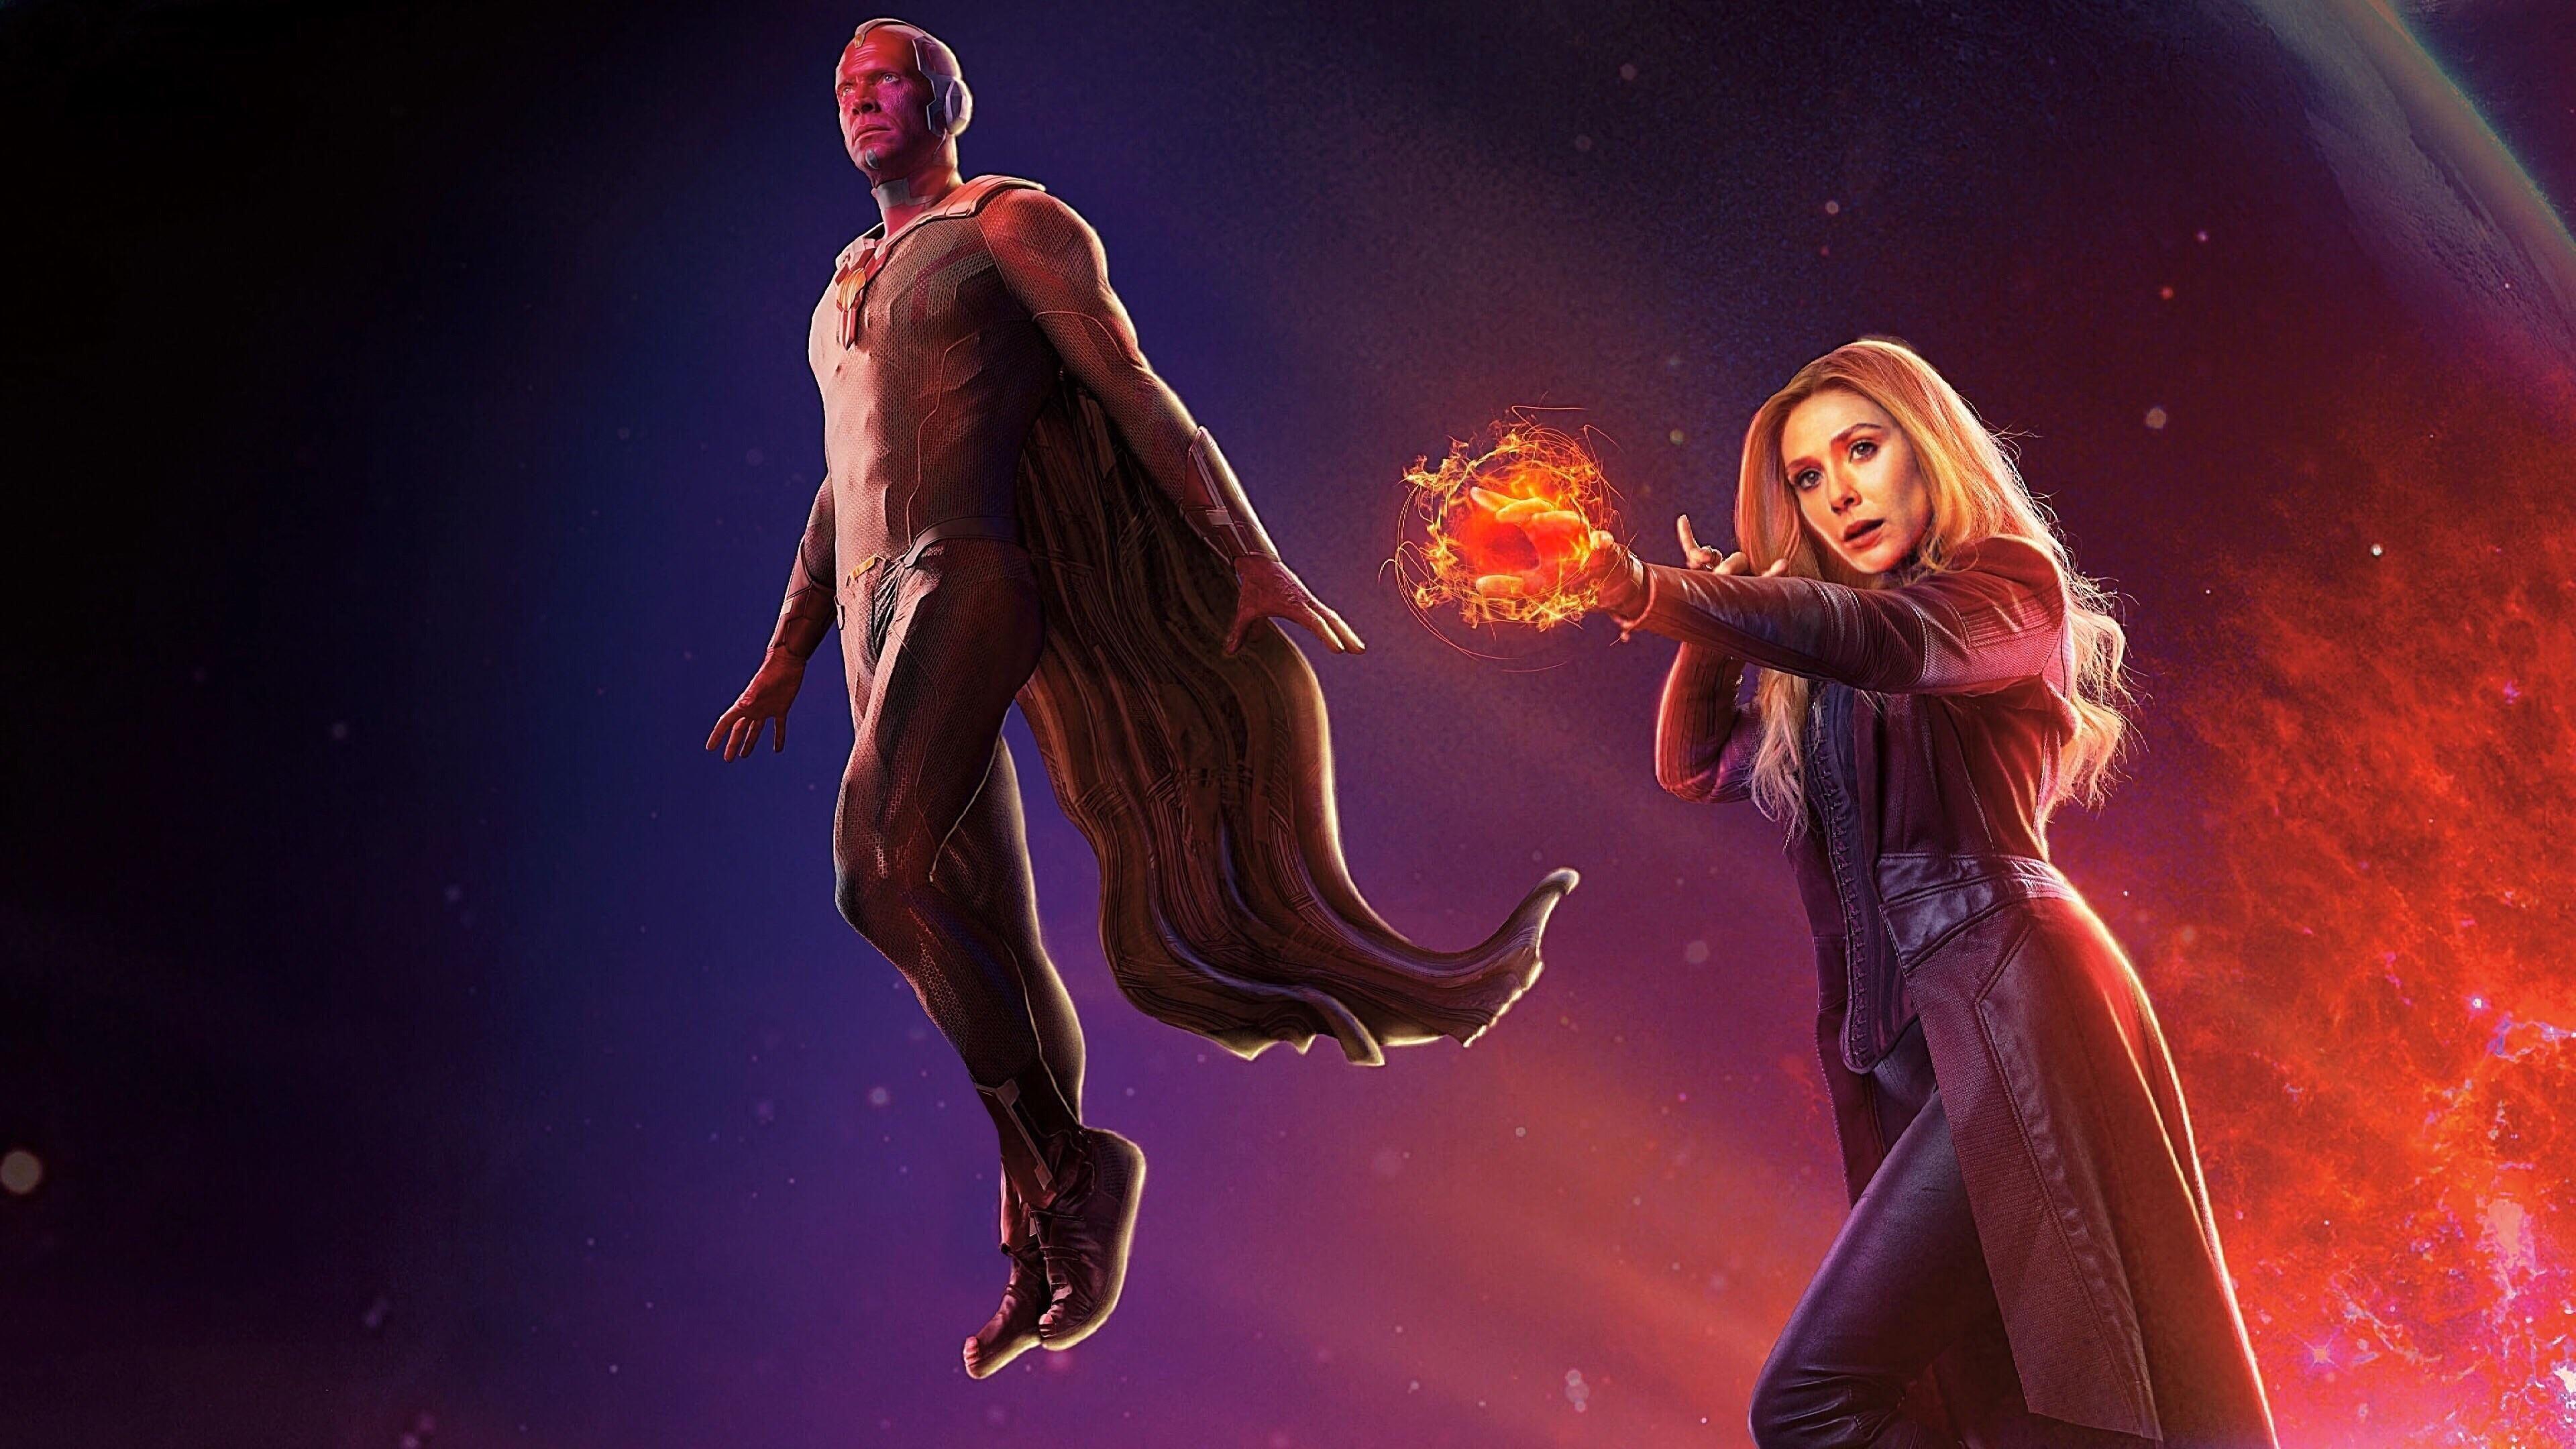 Avengers Infinity War Scarlet Witch and Vision 4k wallpaper!. Witch wallpaper, Marvel paintings, Scarlet witch